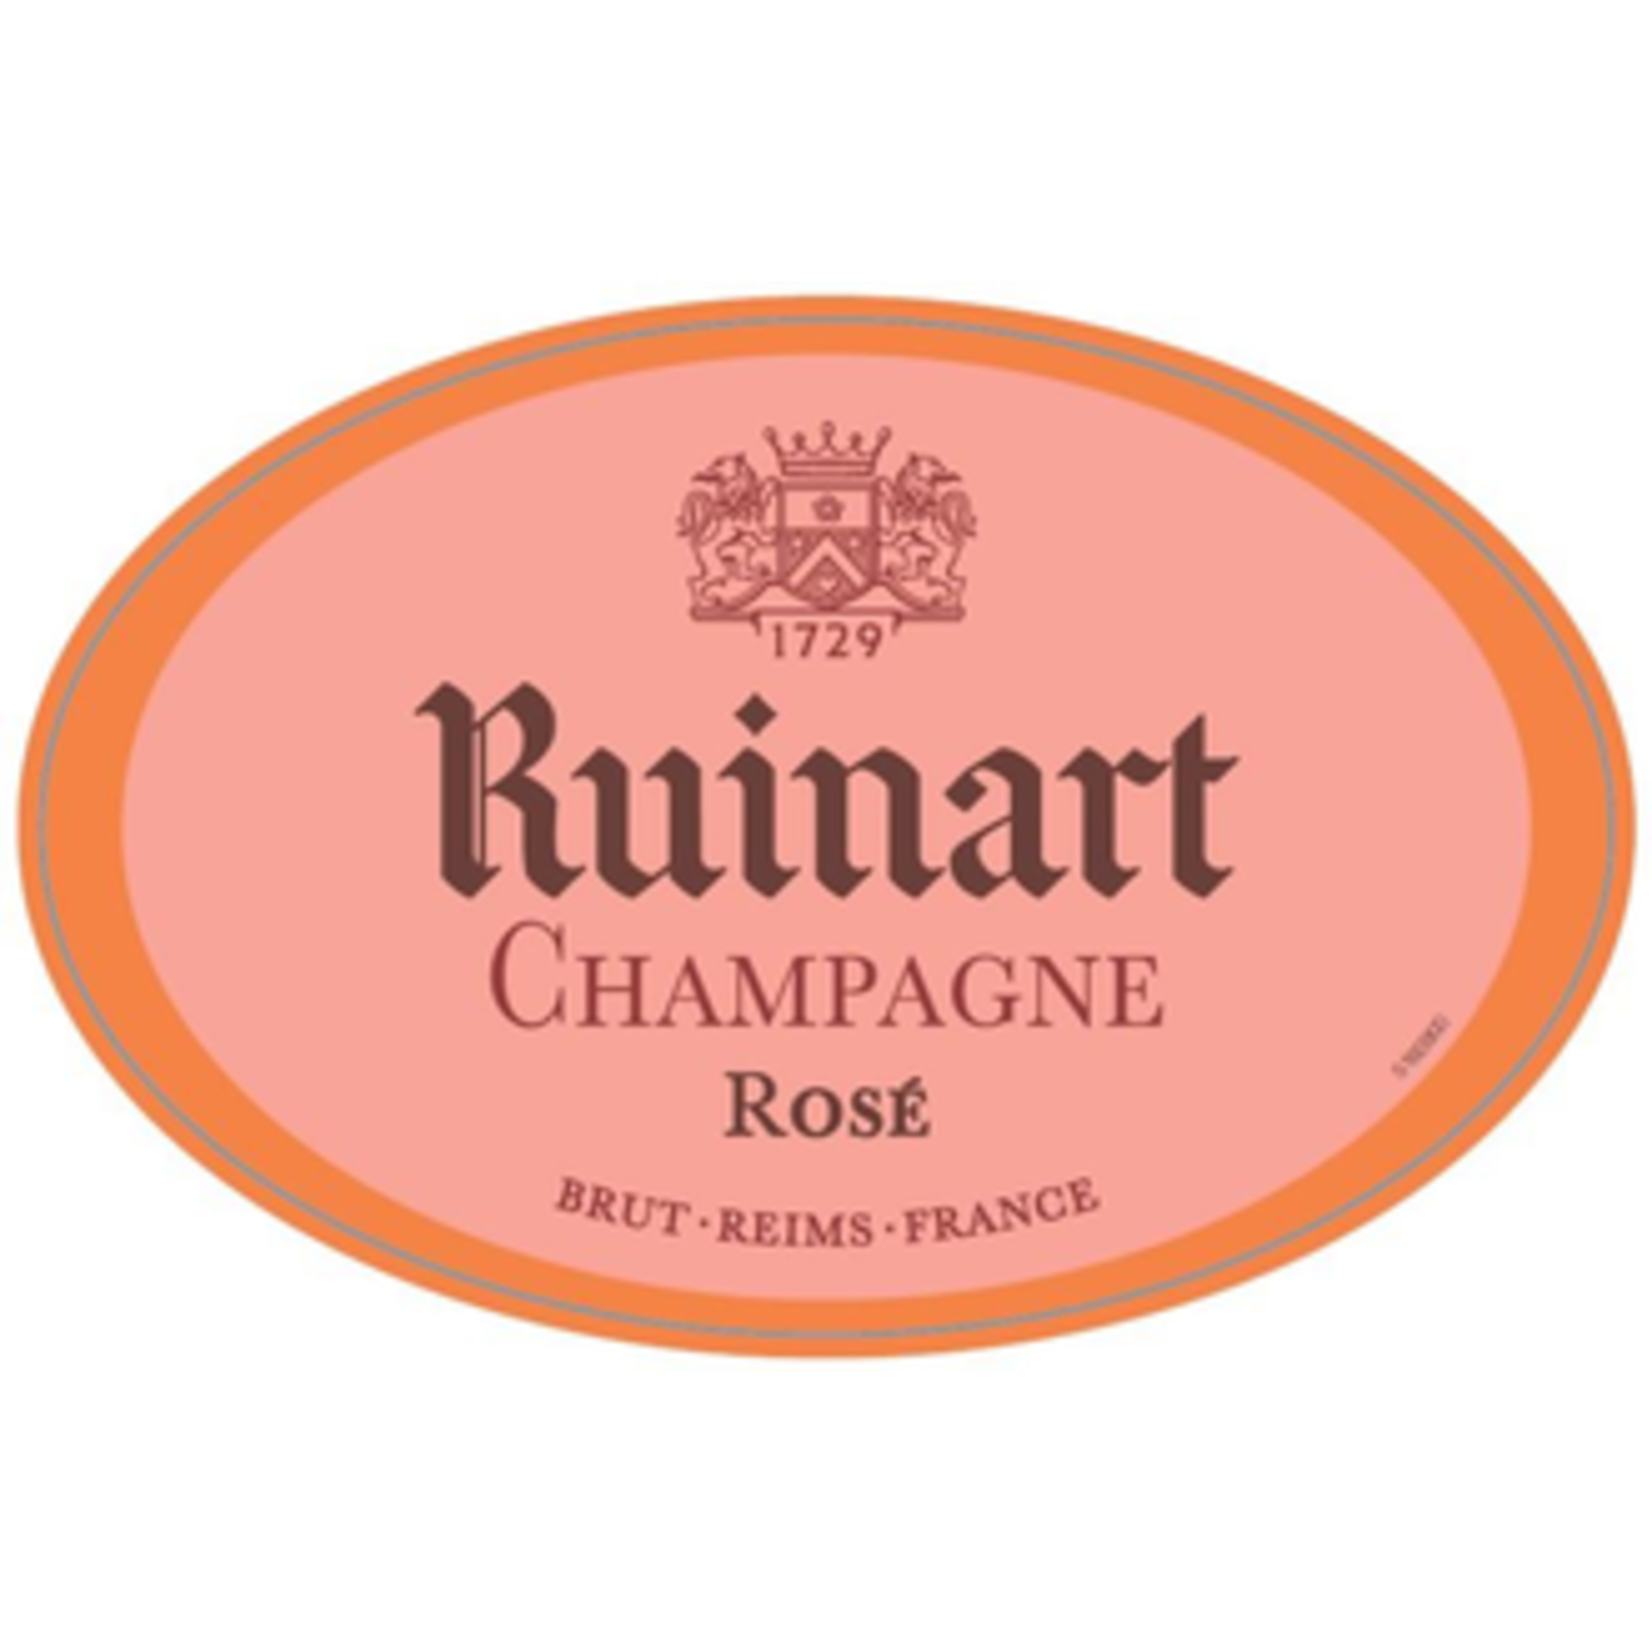 Ruinart Champagne Brut Rose - Royal Wine Merchants - Happy to Offer!